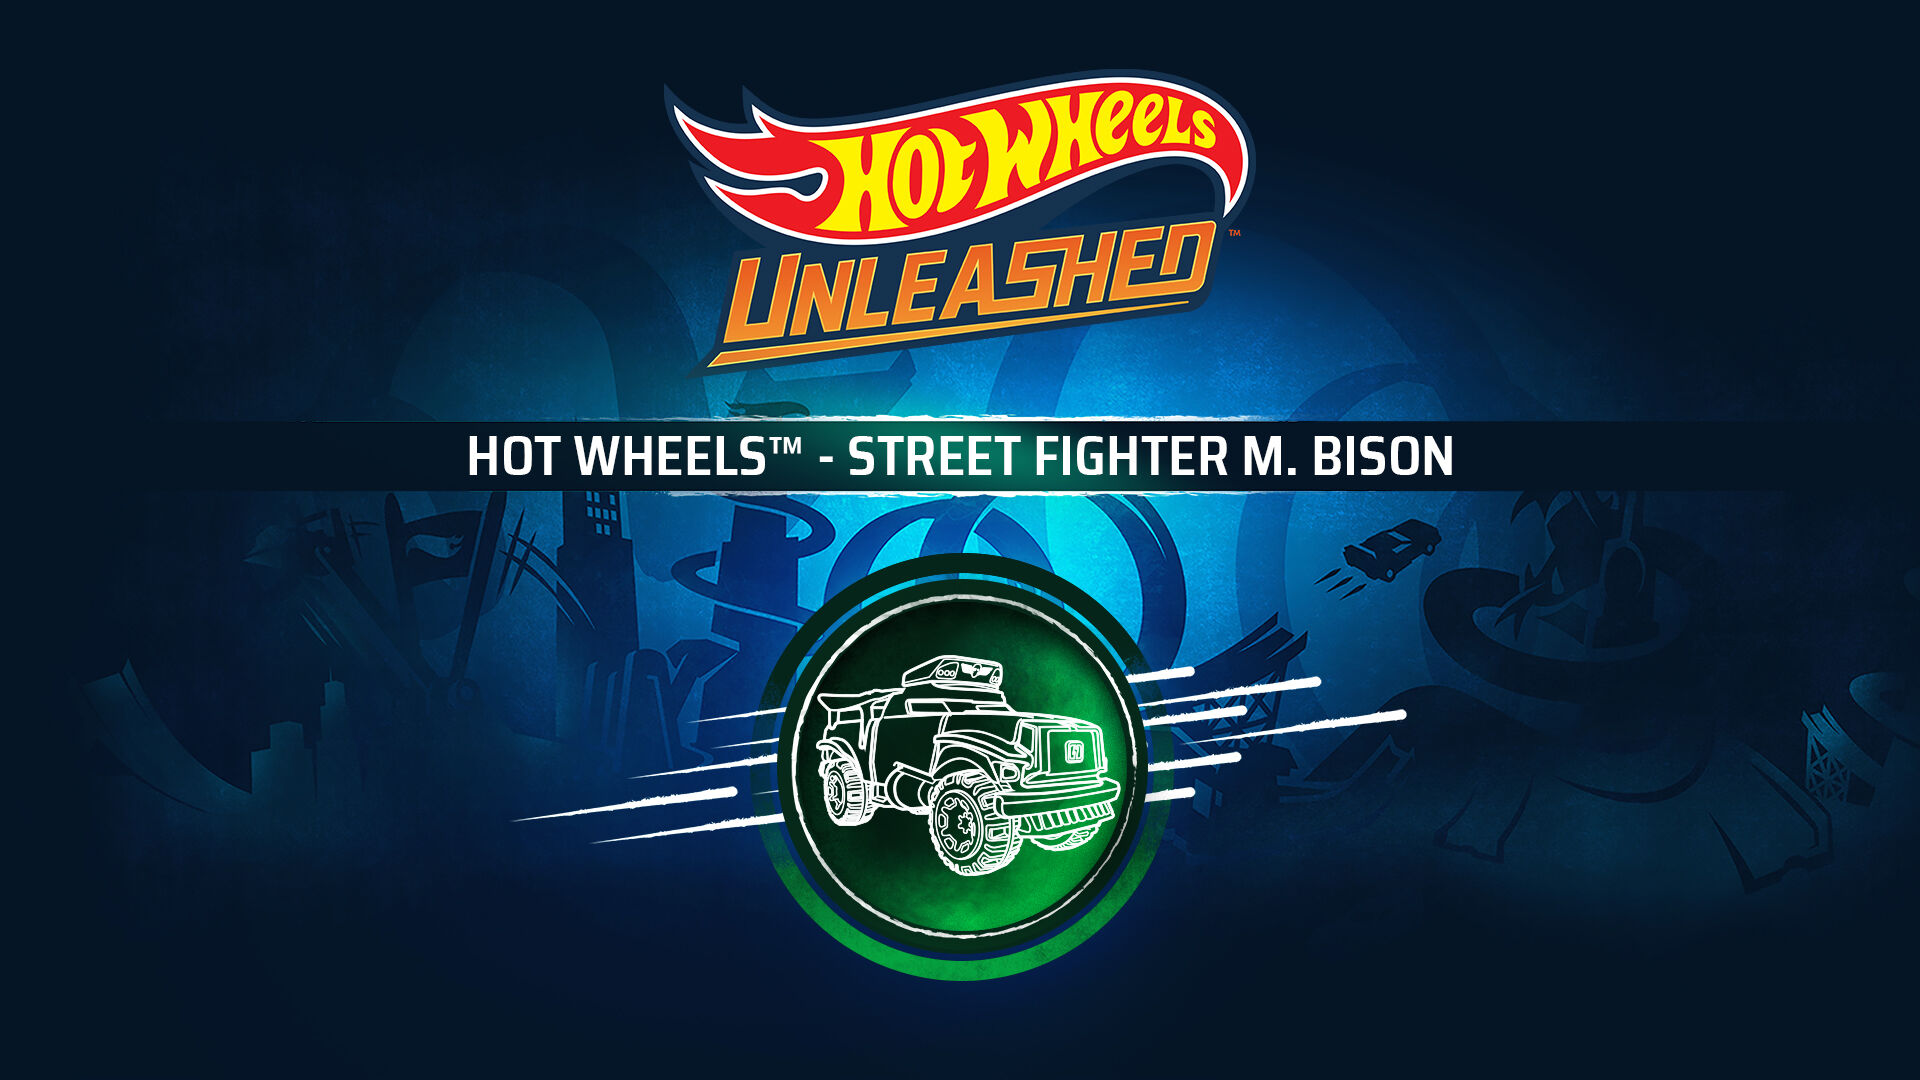 HOT WHEELS UNLEASHED™ - Collectors Edition ダウンロード版 | My 